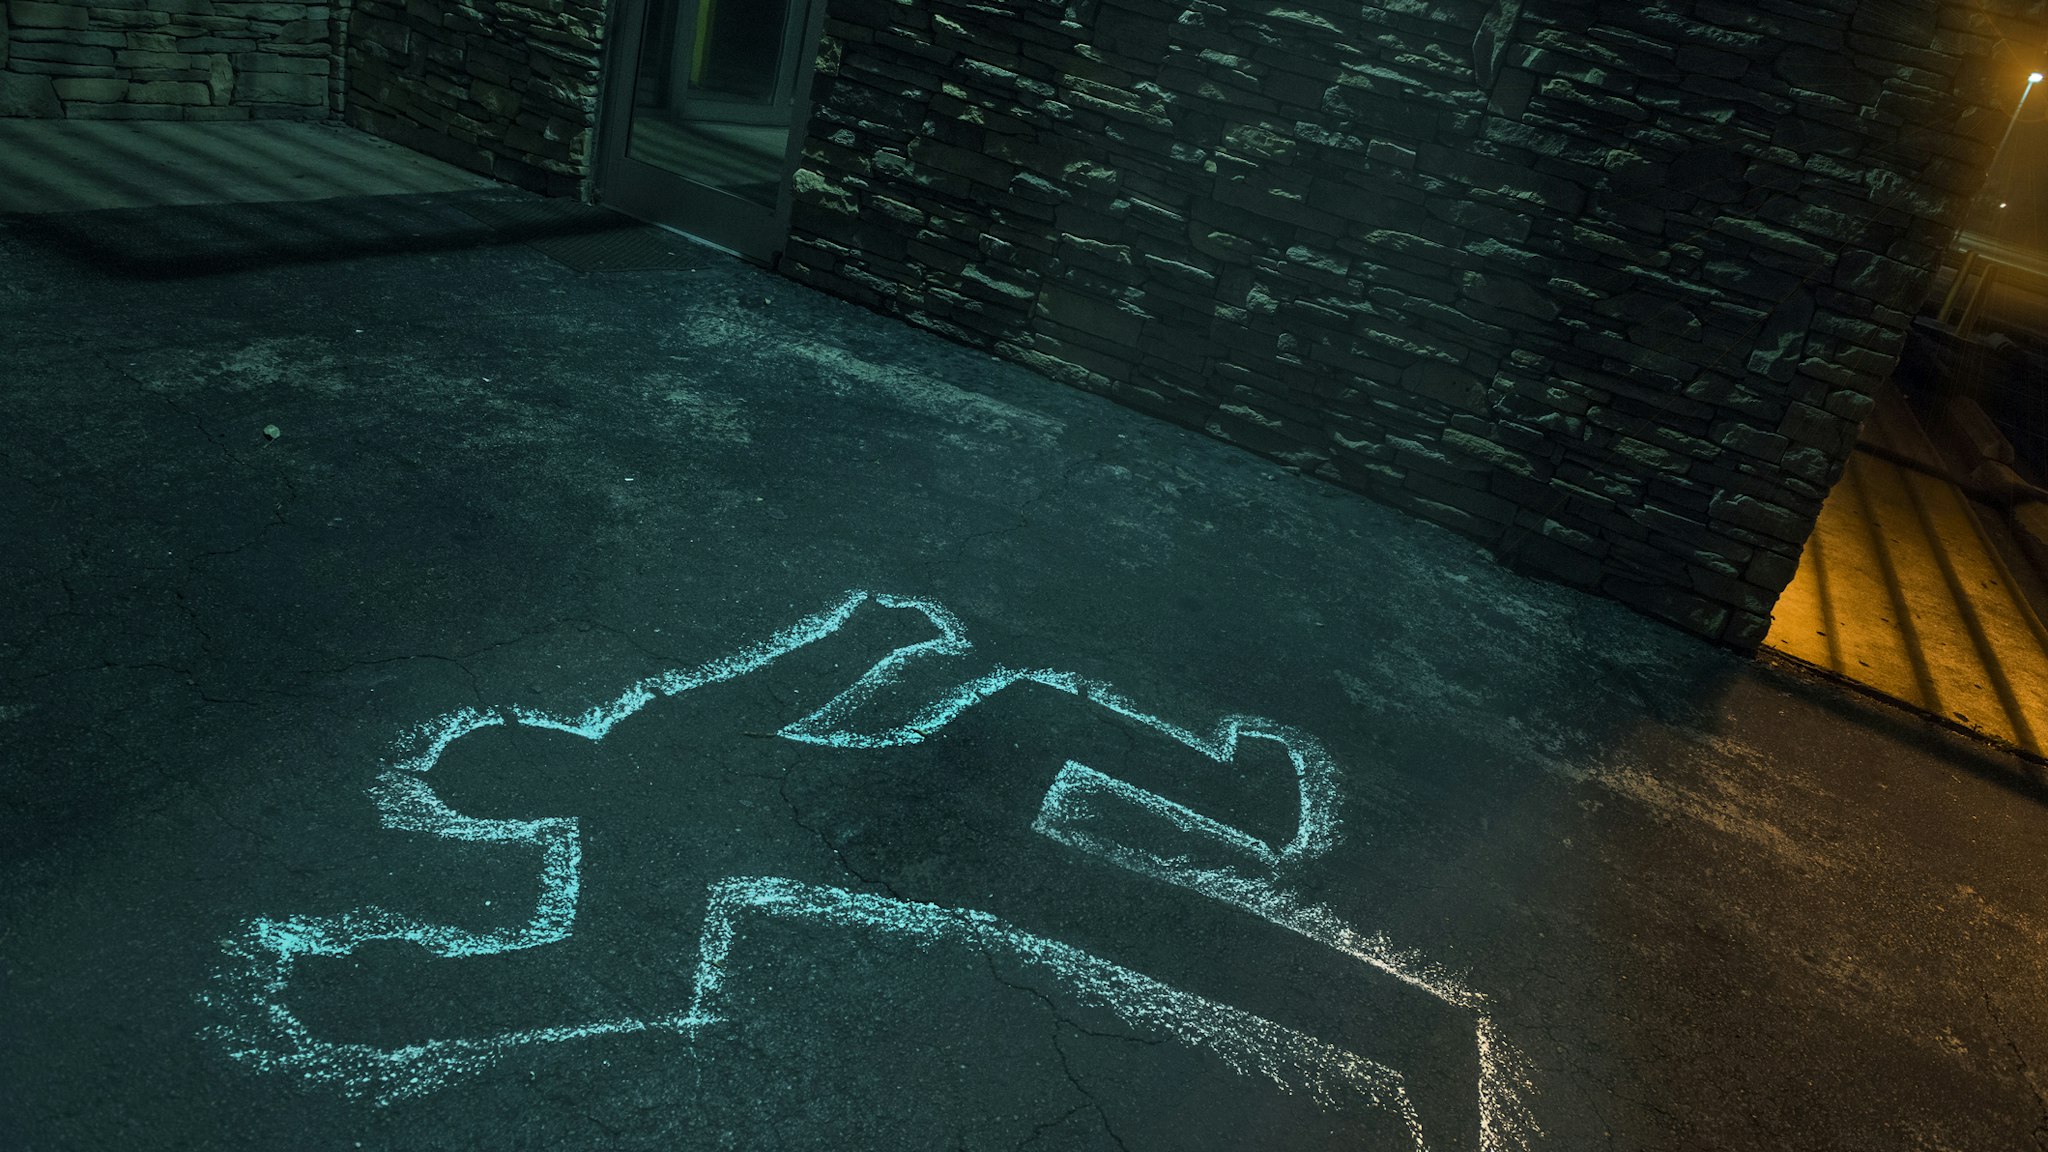 Chalk outline of body of victim on pavement - stock photo